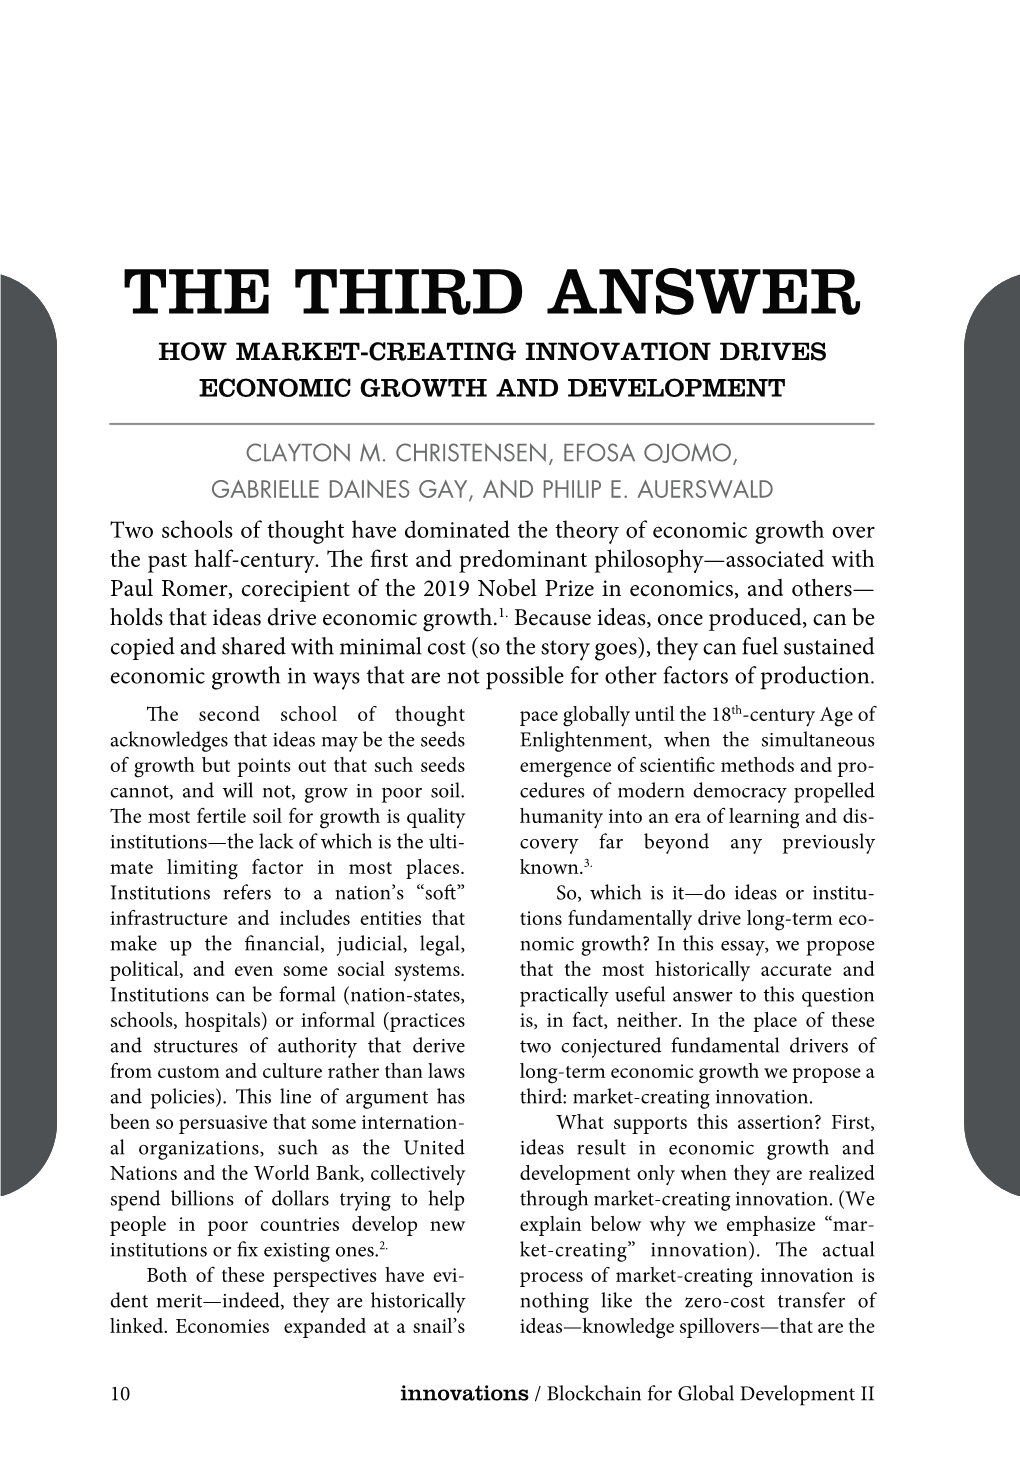 The Third Answer: How Market-Creating Innovation Drives Economic Growth and Development